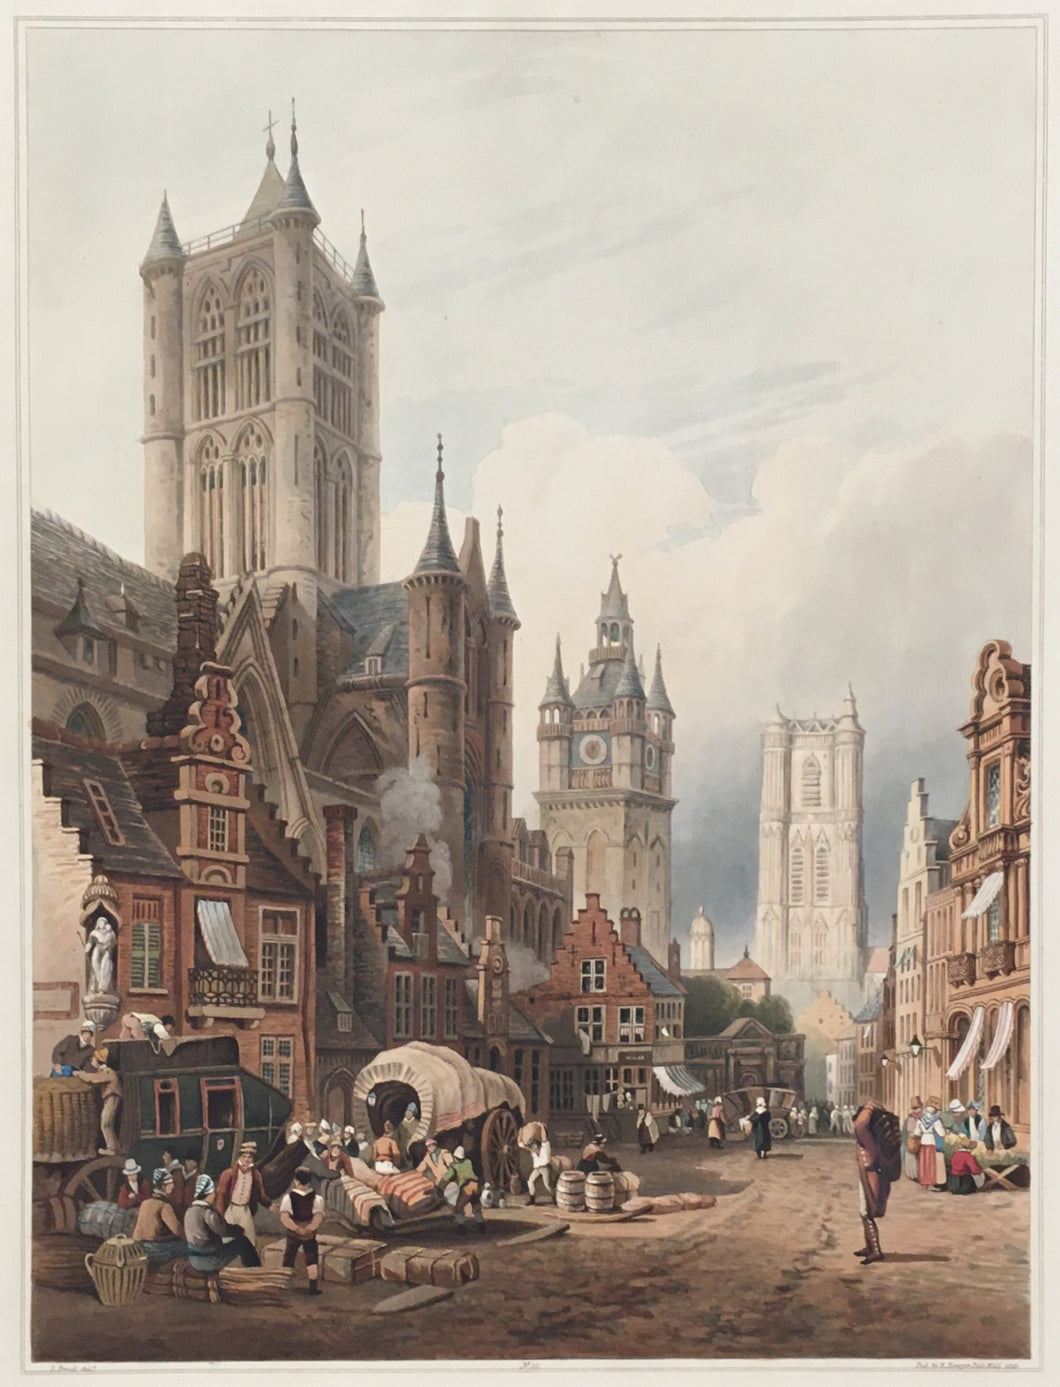 Prout, Samuel “Ghent, or Gand, With the Cathedral.”  [Belgium] Plate 10.